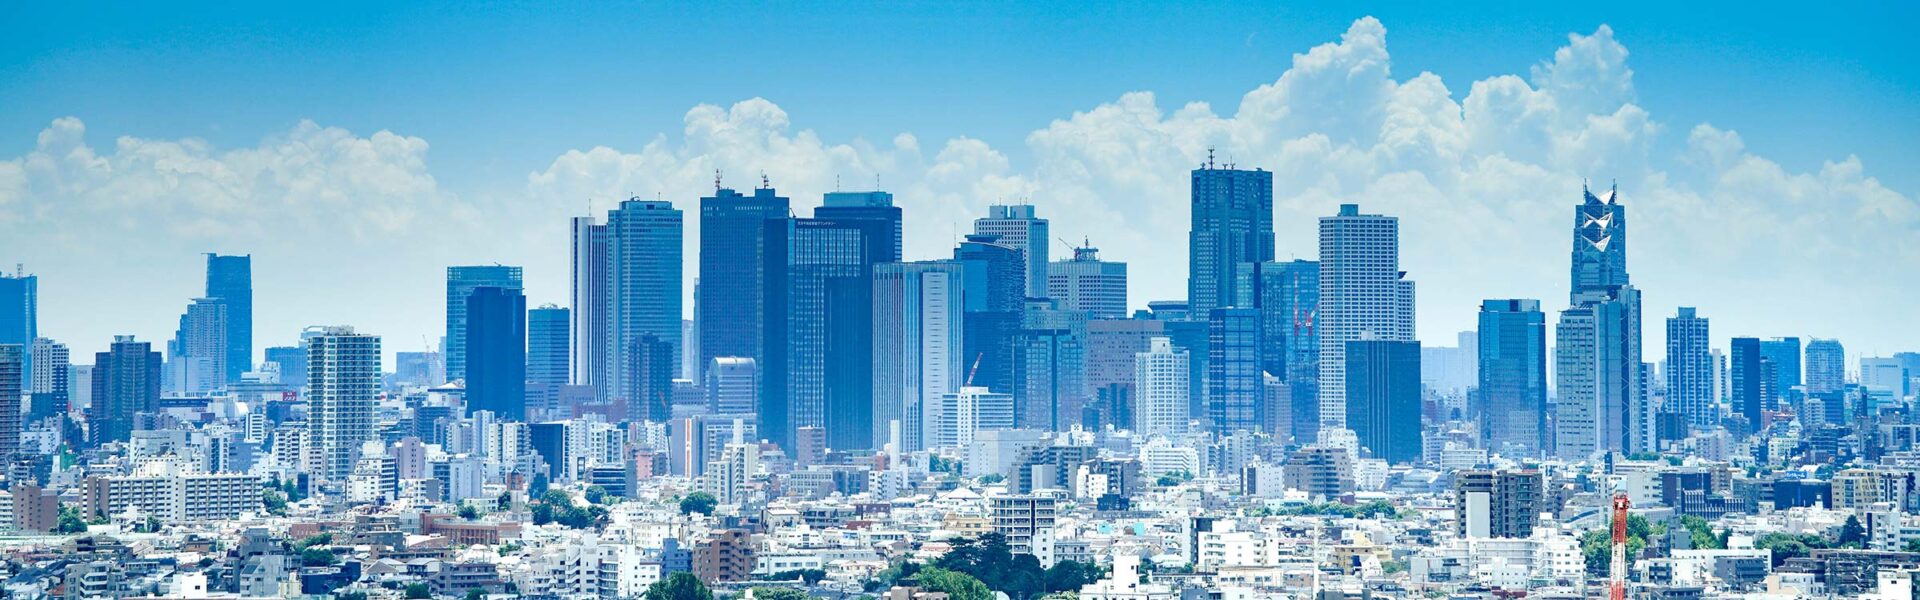 The city of Tokyo in the summer, with a blue sky behind the skyscrapers.